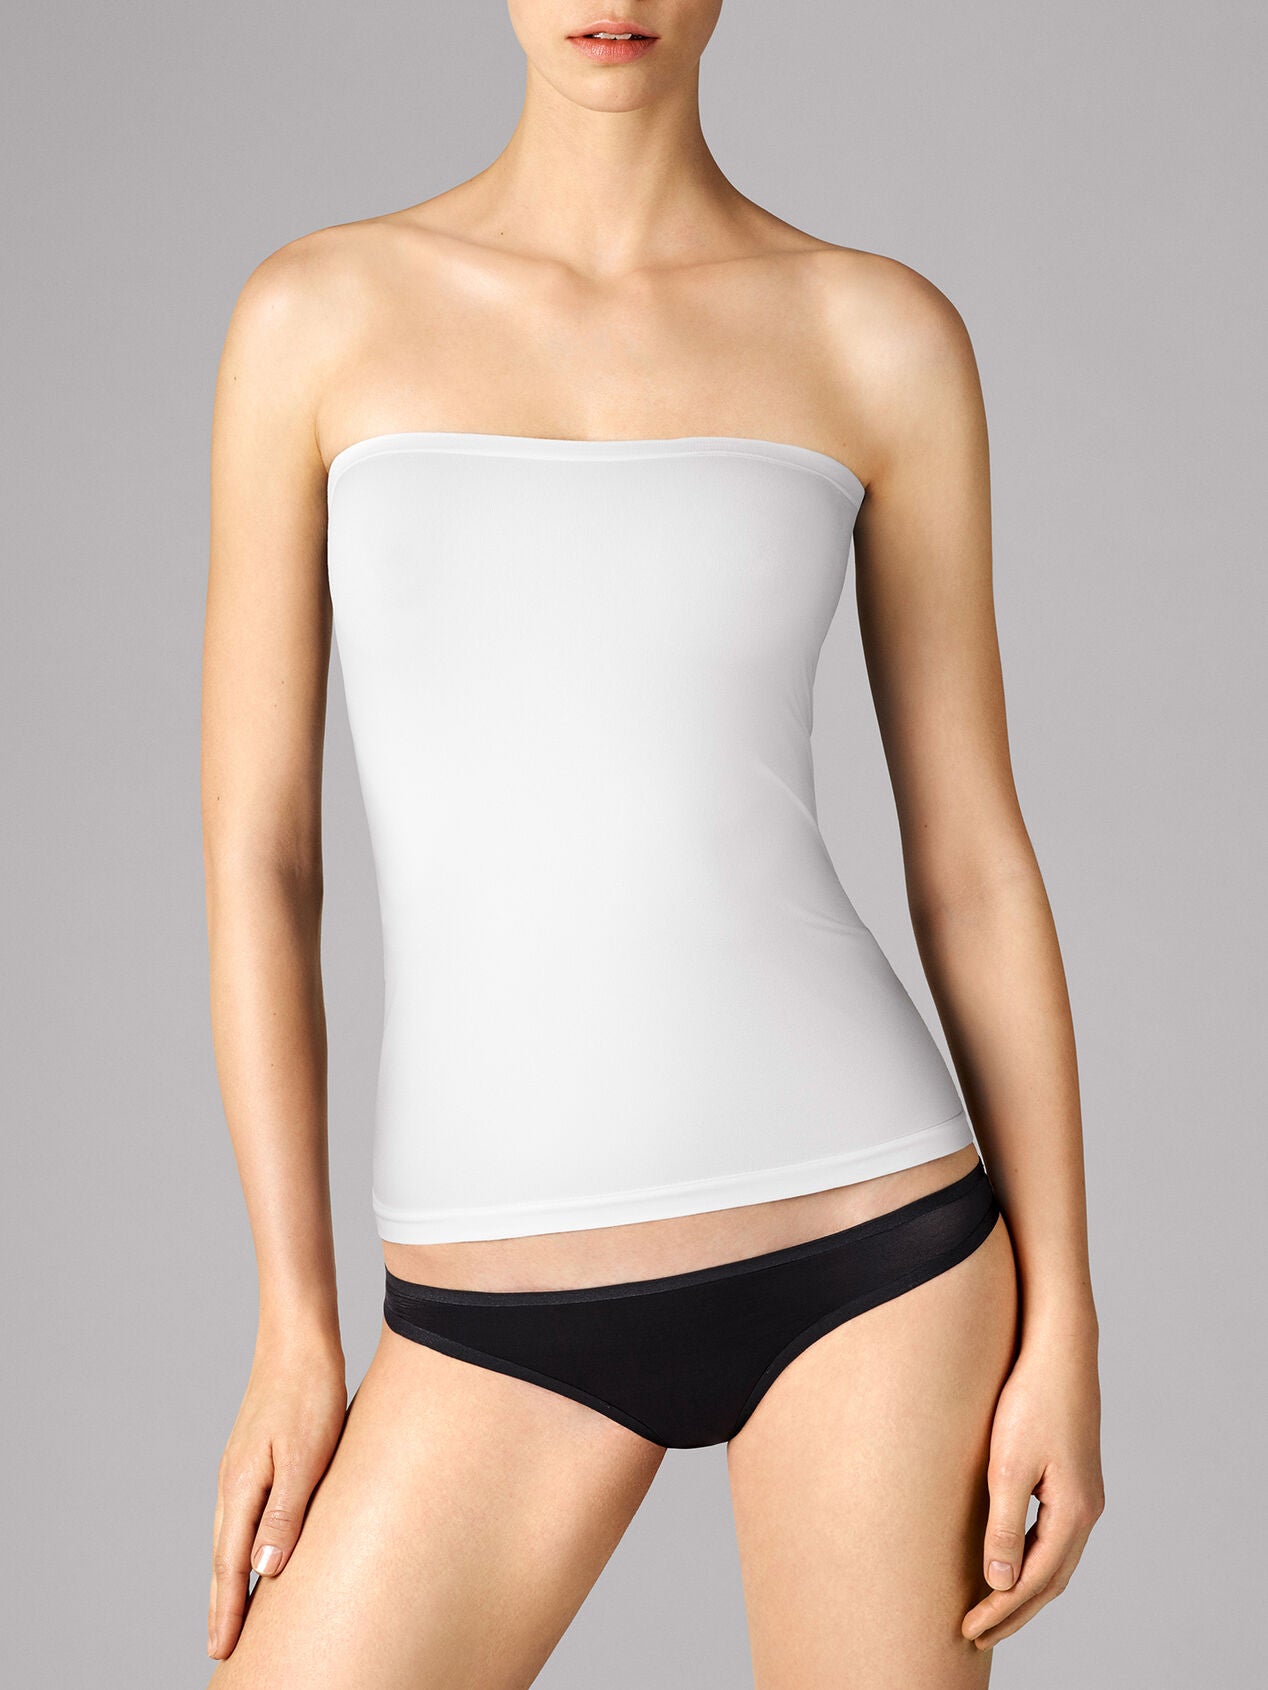 Wolford Fatal Top